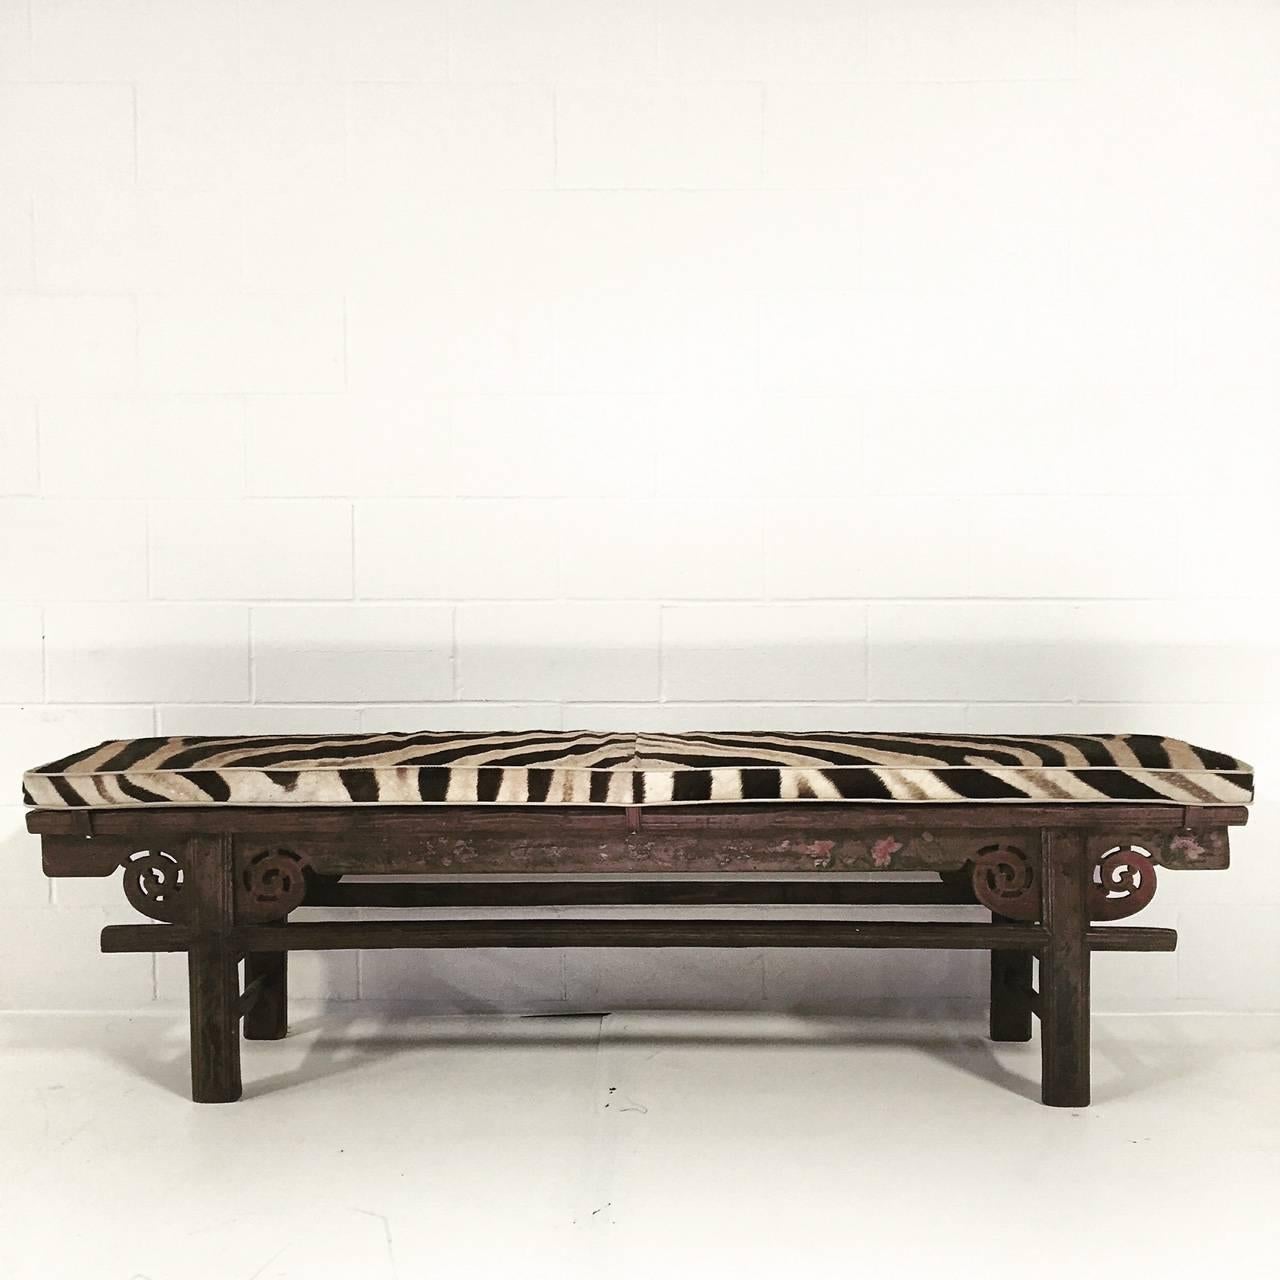 Early 20th Century Vintage Chinese Painted Farmhouse Bench with Zebra Hide Cushion